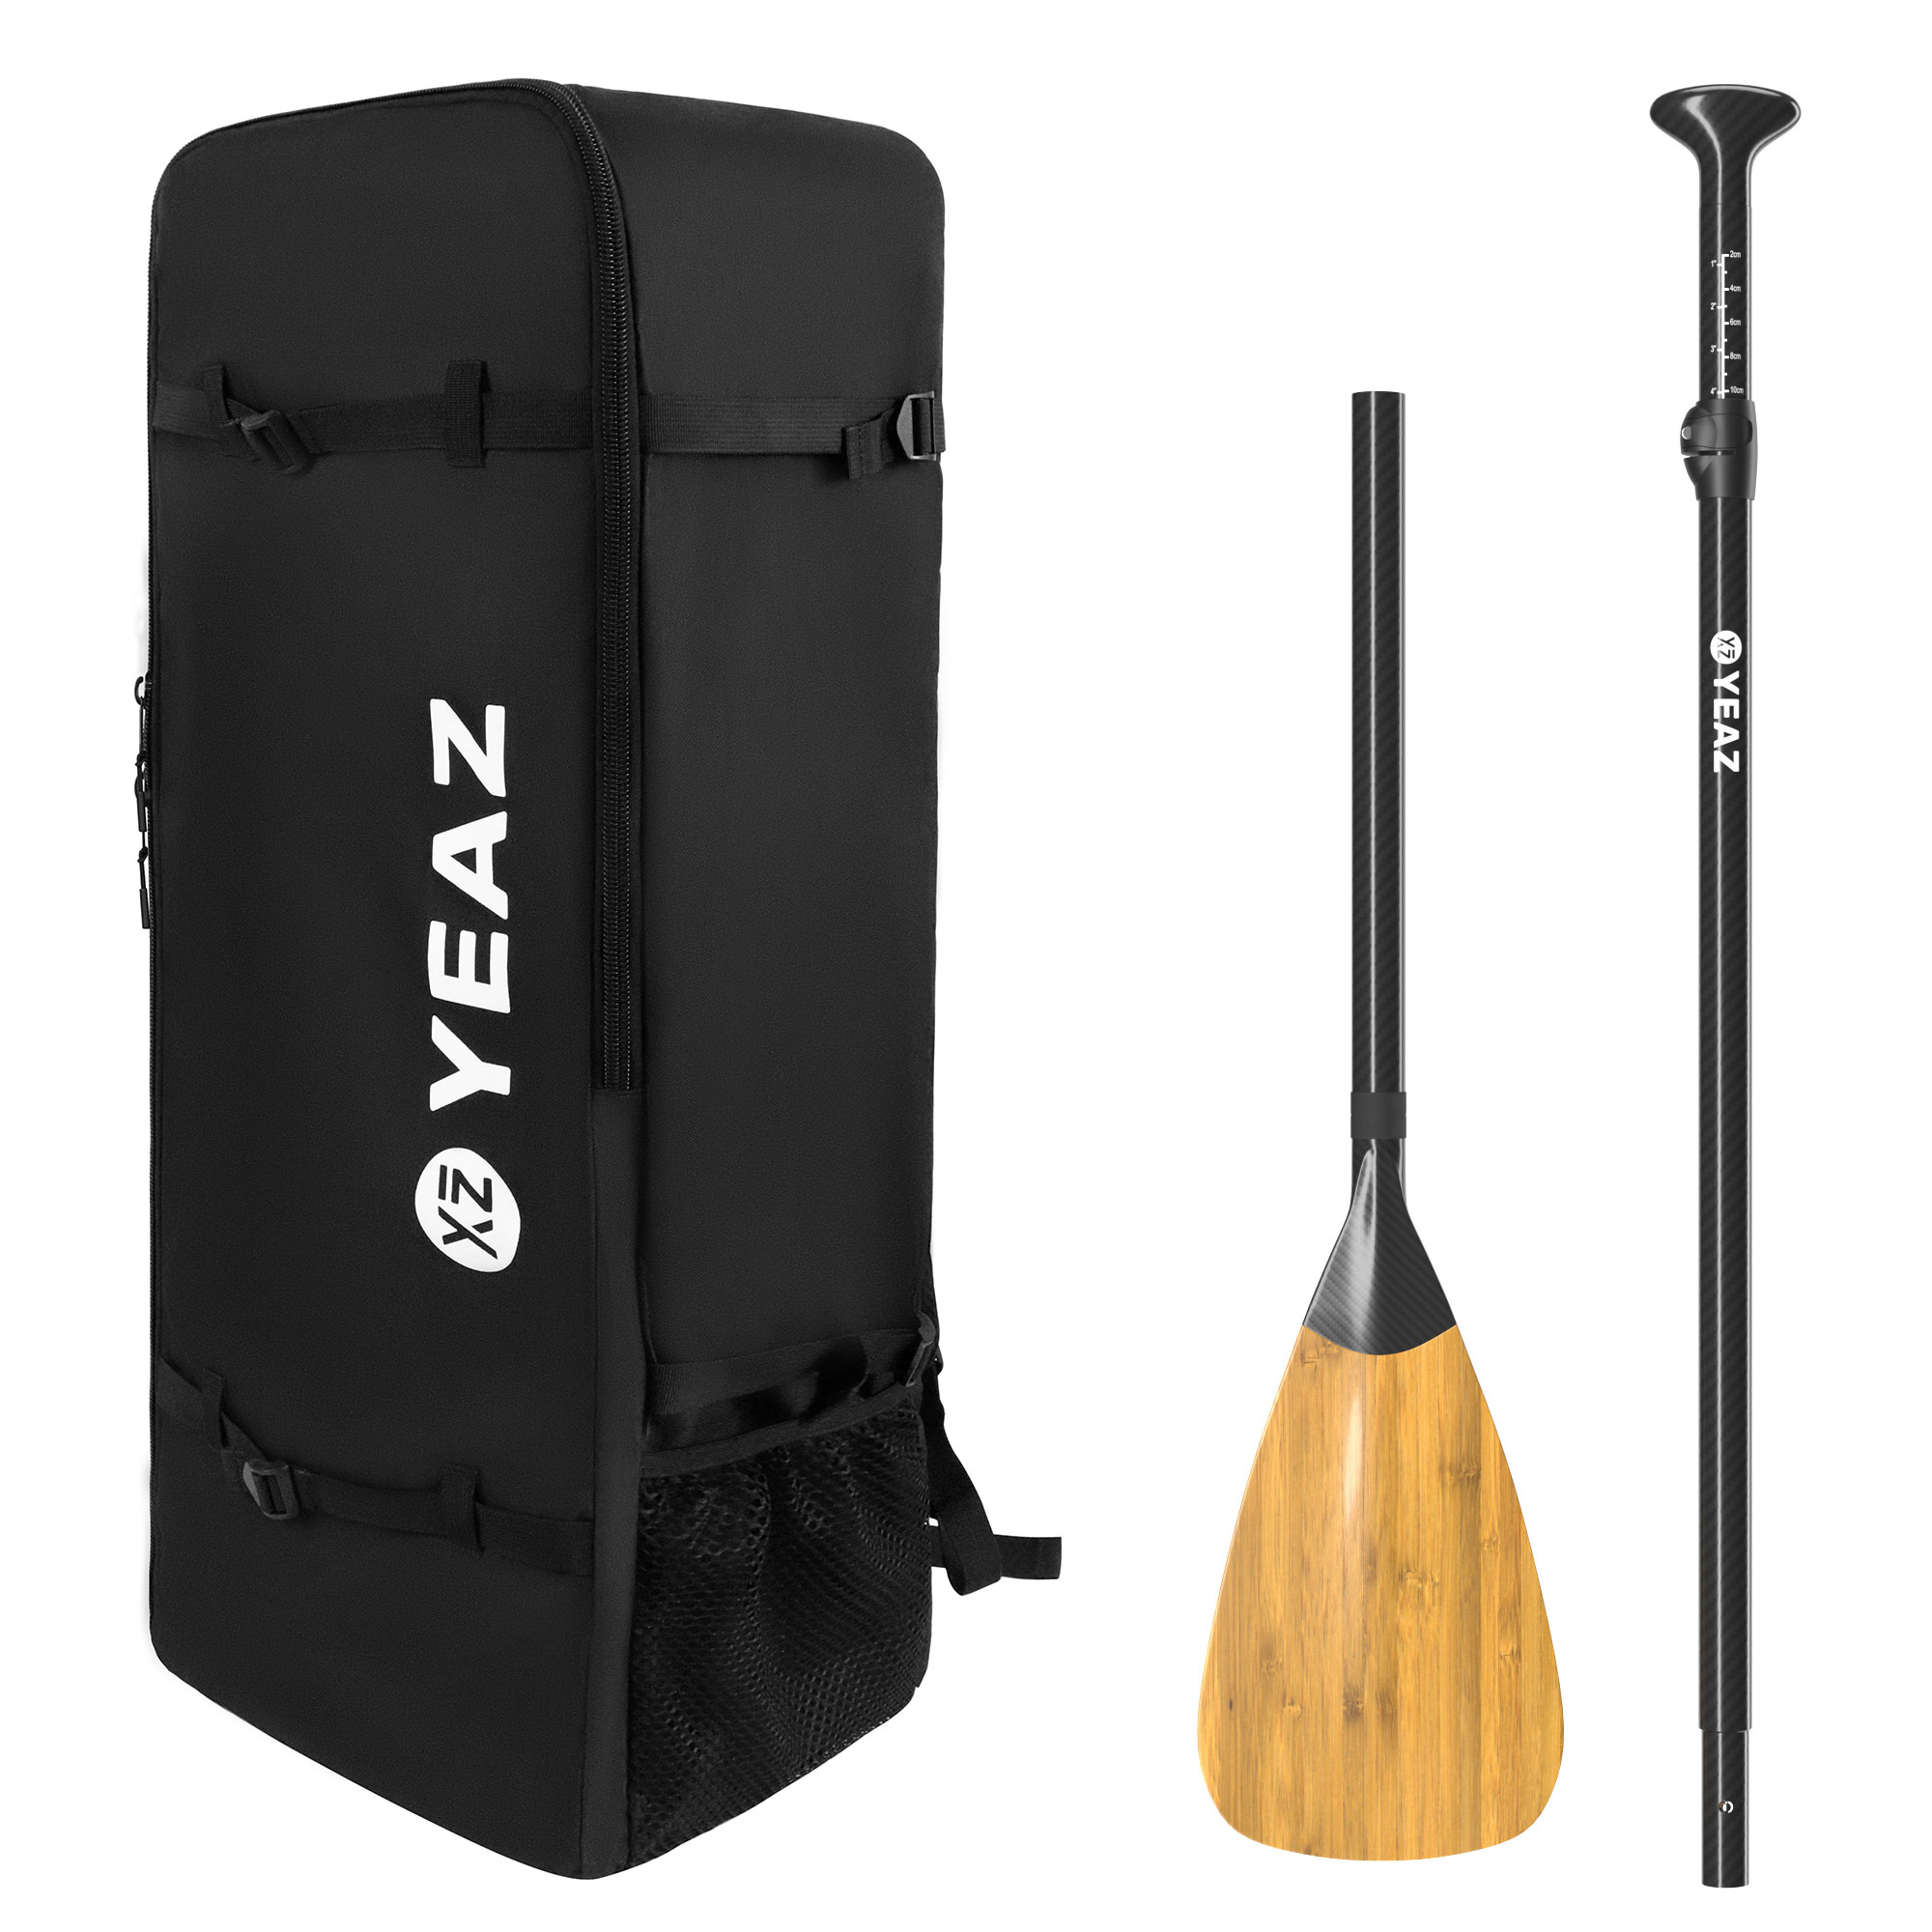 KIT eclipse SUP BAMBOO YEAZ Acessories, black